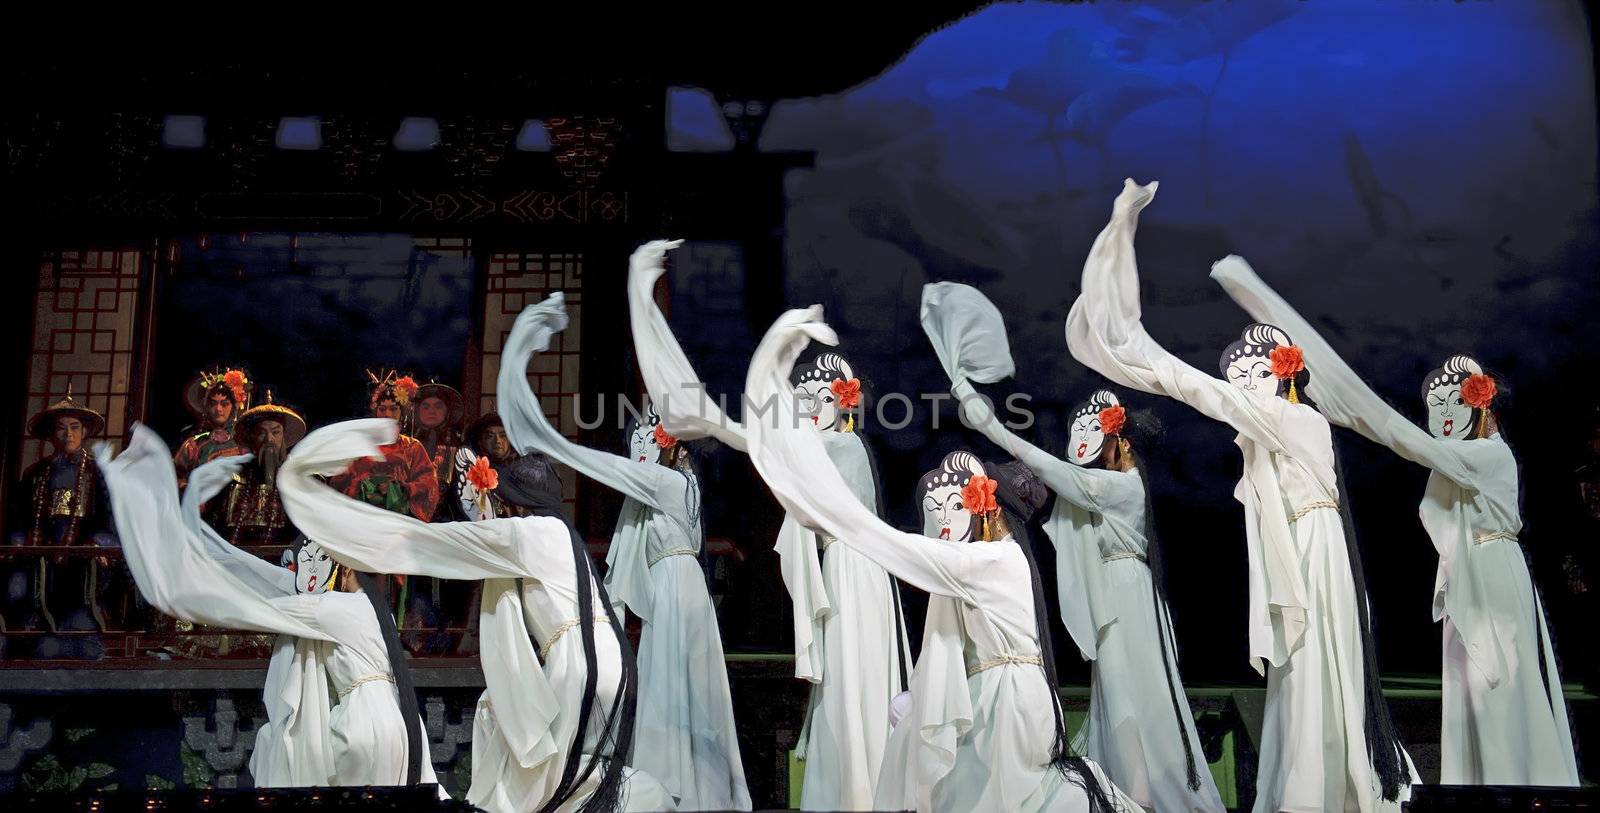 CHENGDU - JUN 3: chinese Cantonese opera performer make a show on stage to compete for awards in 25th Chinese Drama Plum Blossom Award competition at Jinsha theater.Jun 3, 2011 in Chengdu, China.
Chinese Drama Plum Blossom Award is the highest theatrical award in China.